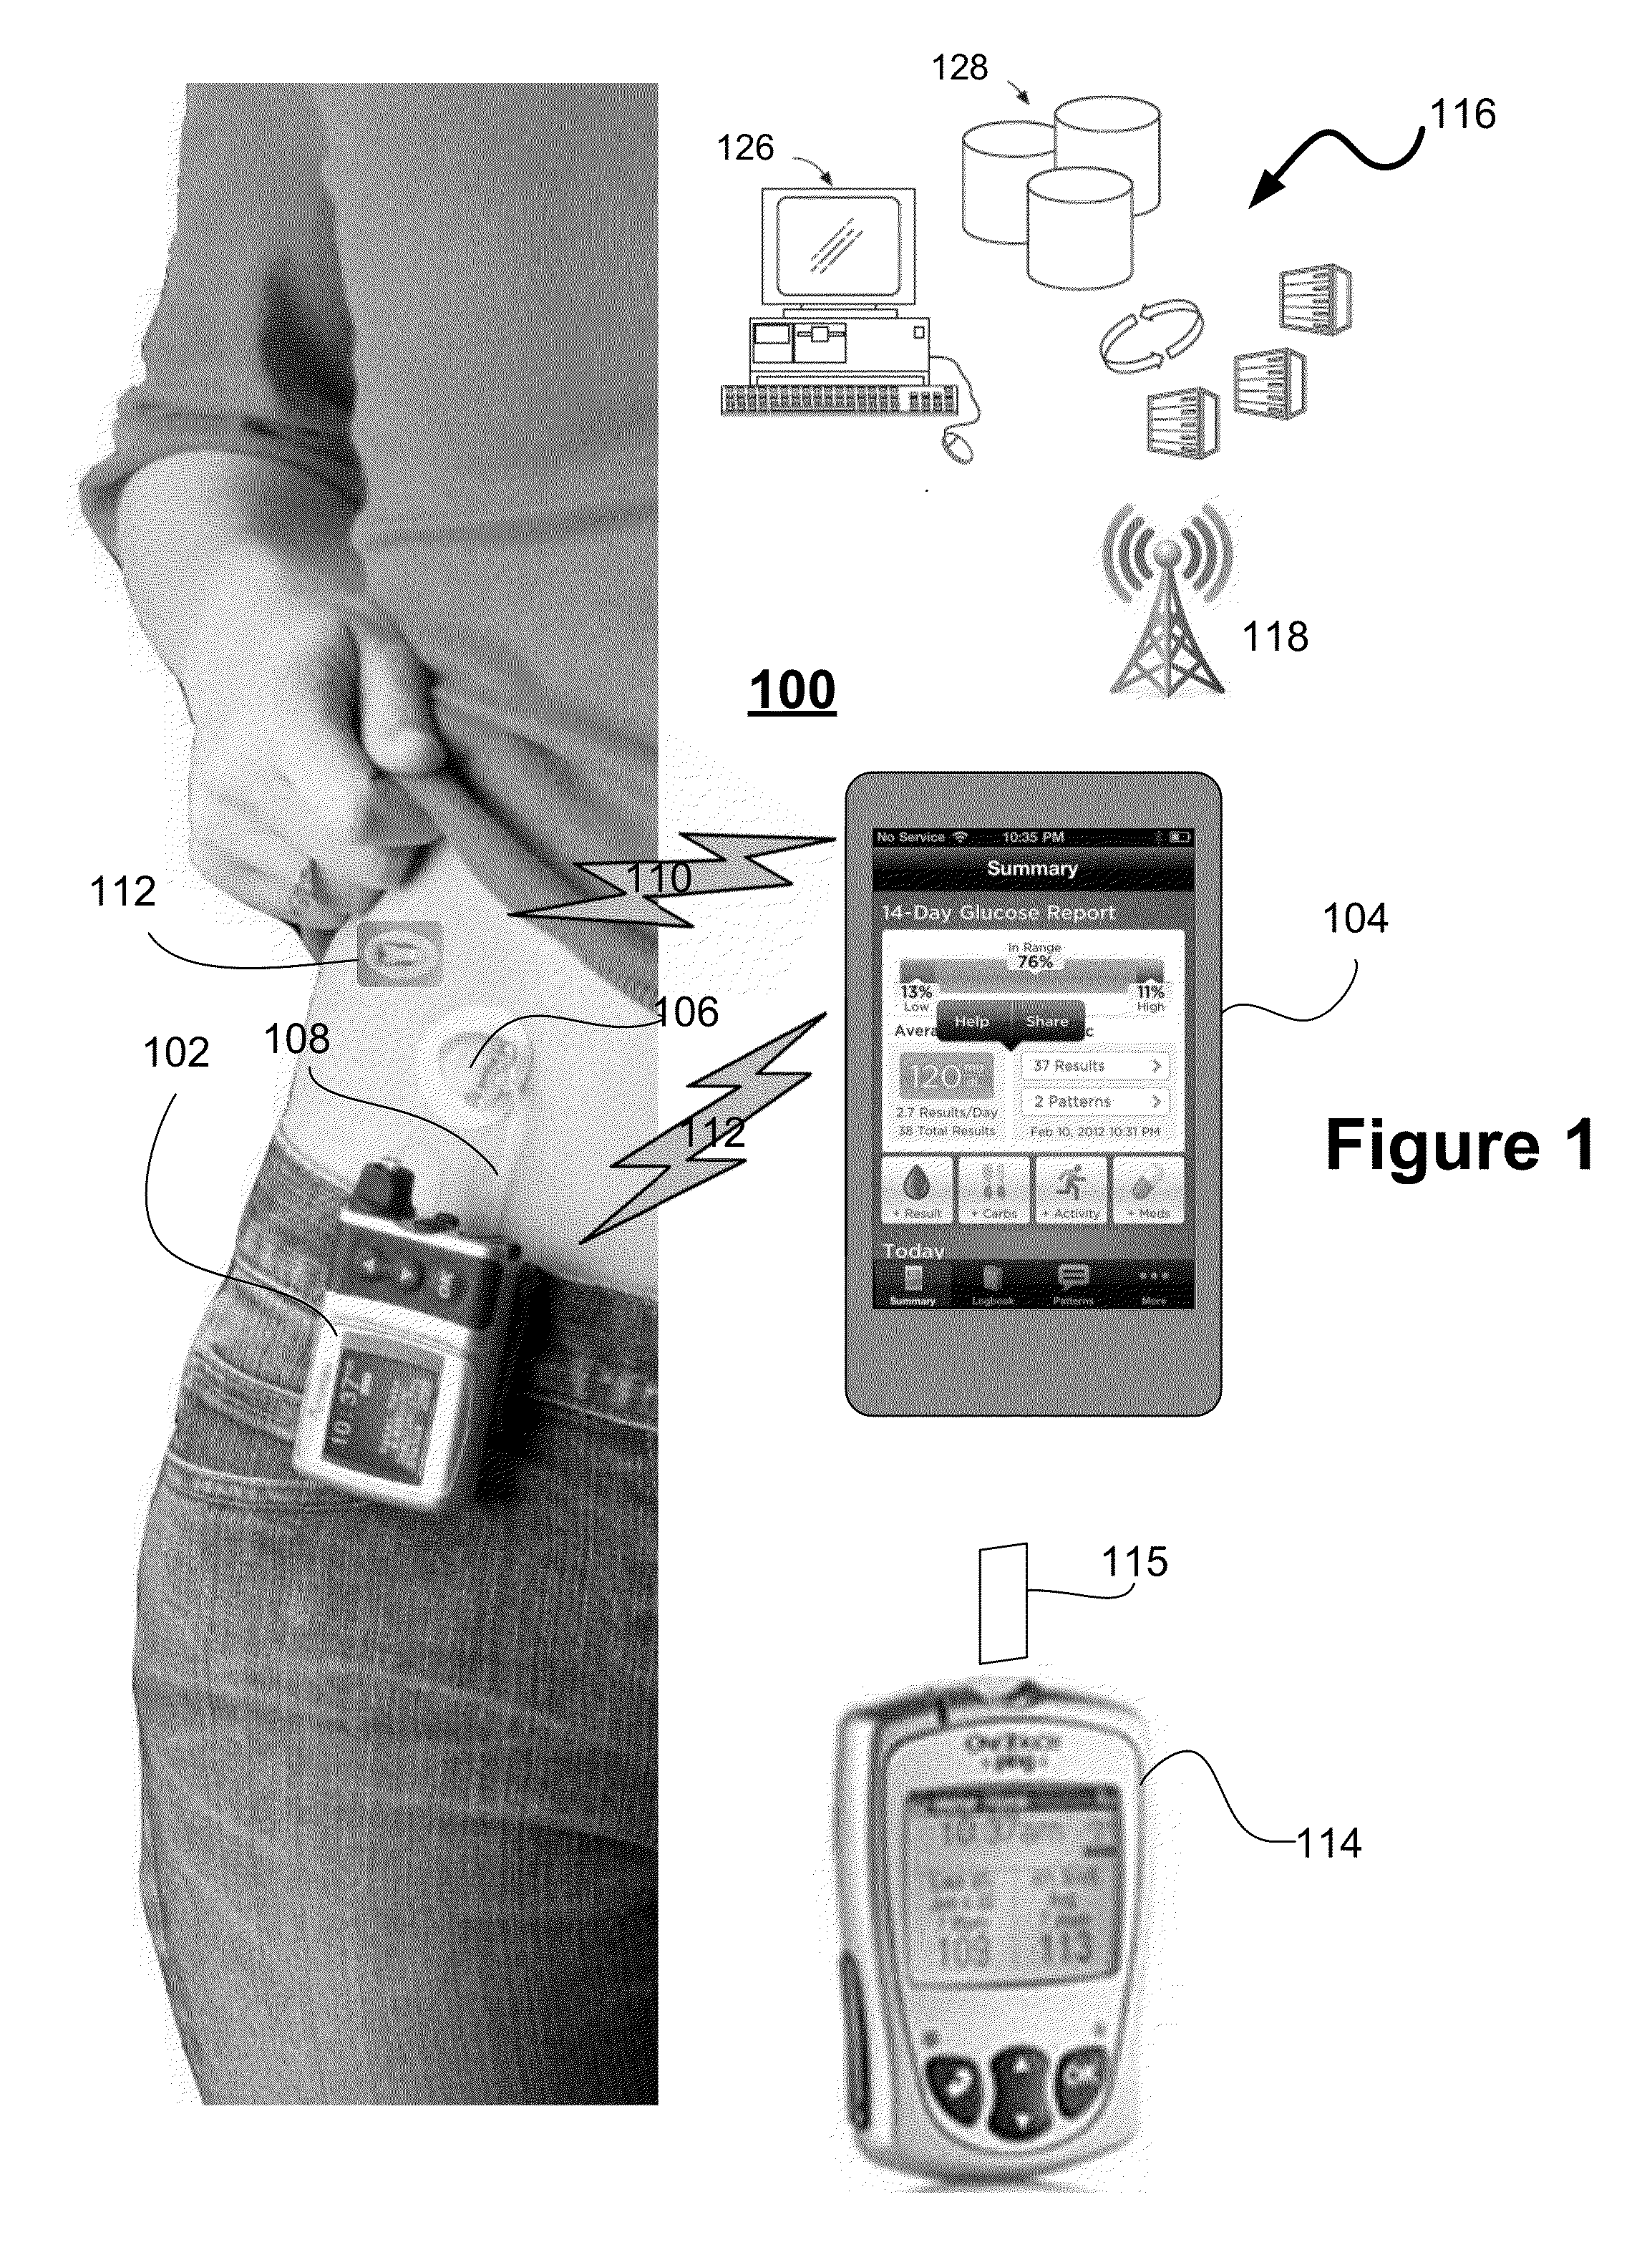 Method and system for a hybrid control-to-target and control-to-range model predictive control of an artificial pancreas